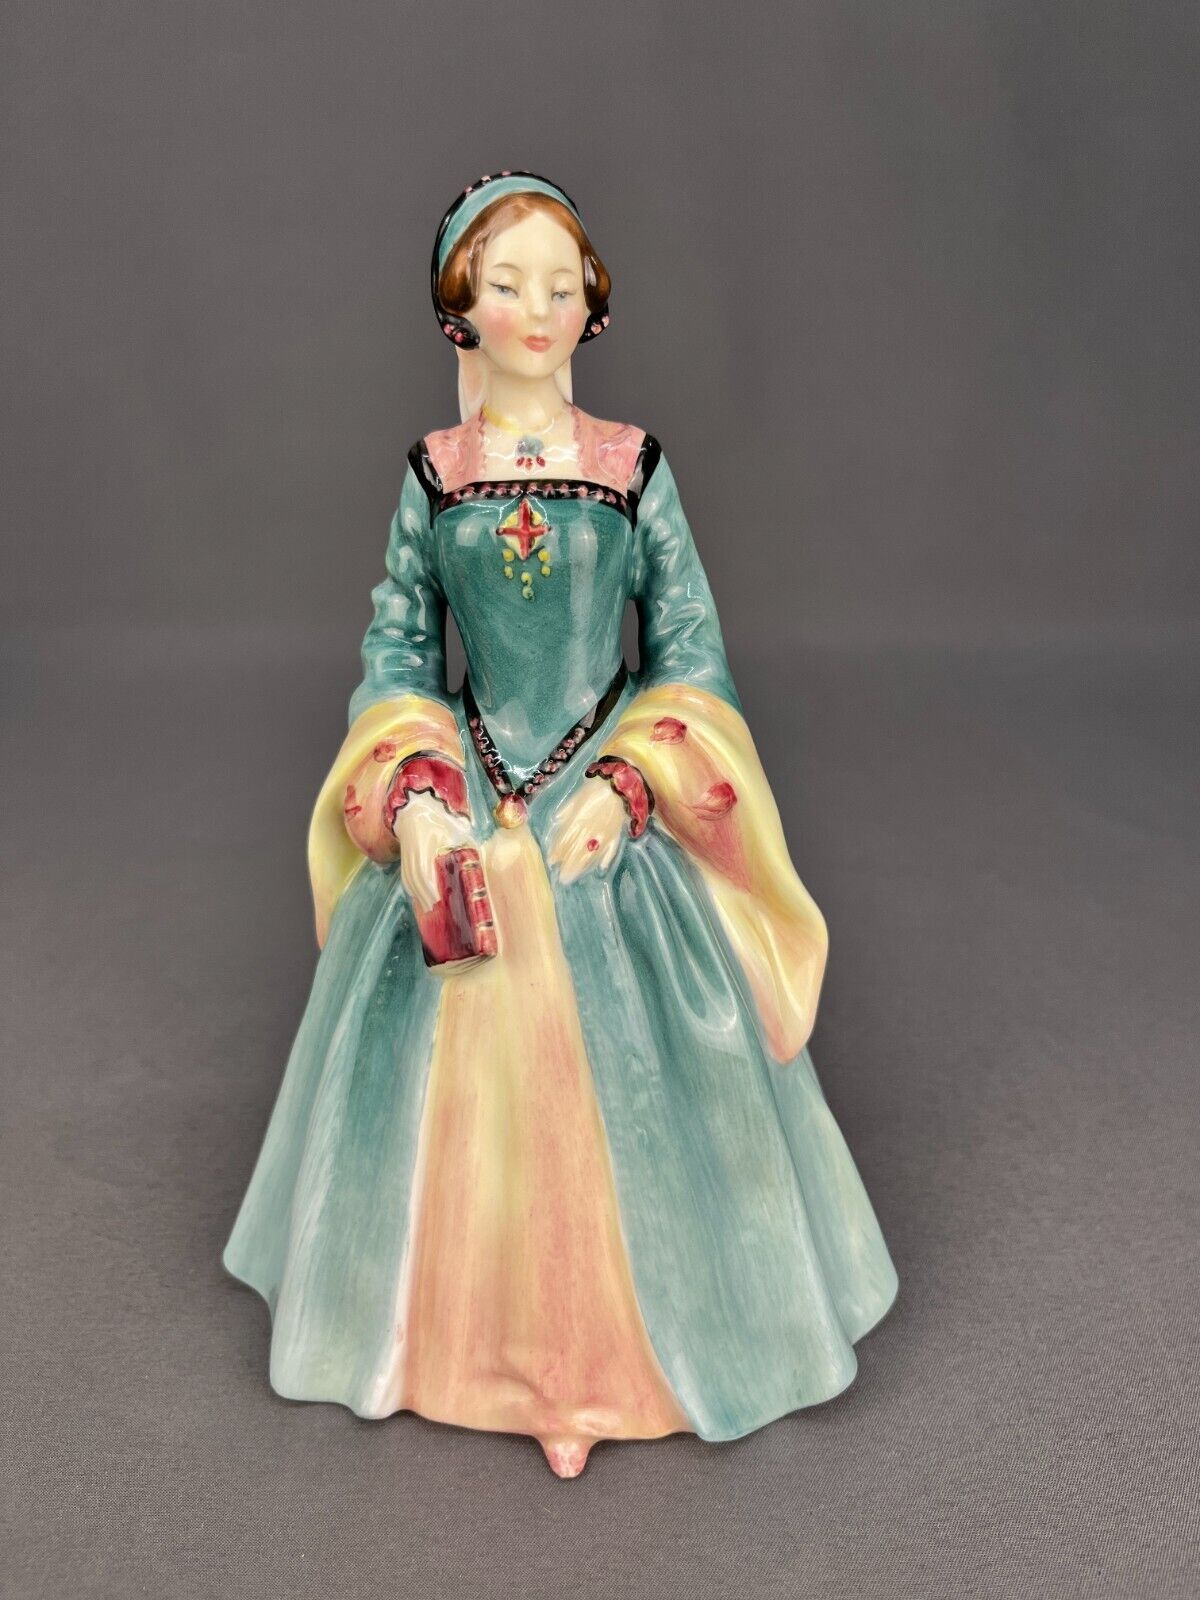 Vtg Royal Doulton Janice Figurine HN2022 1948 Green and Pink Colourway; Mint